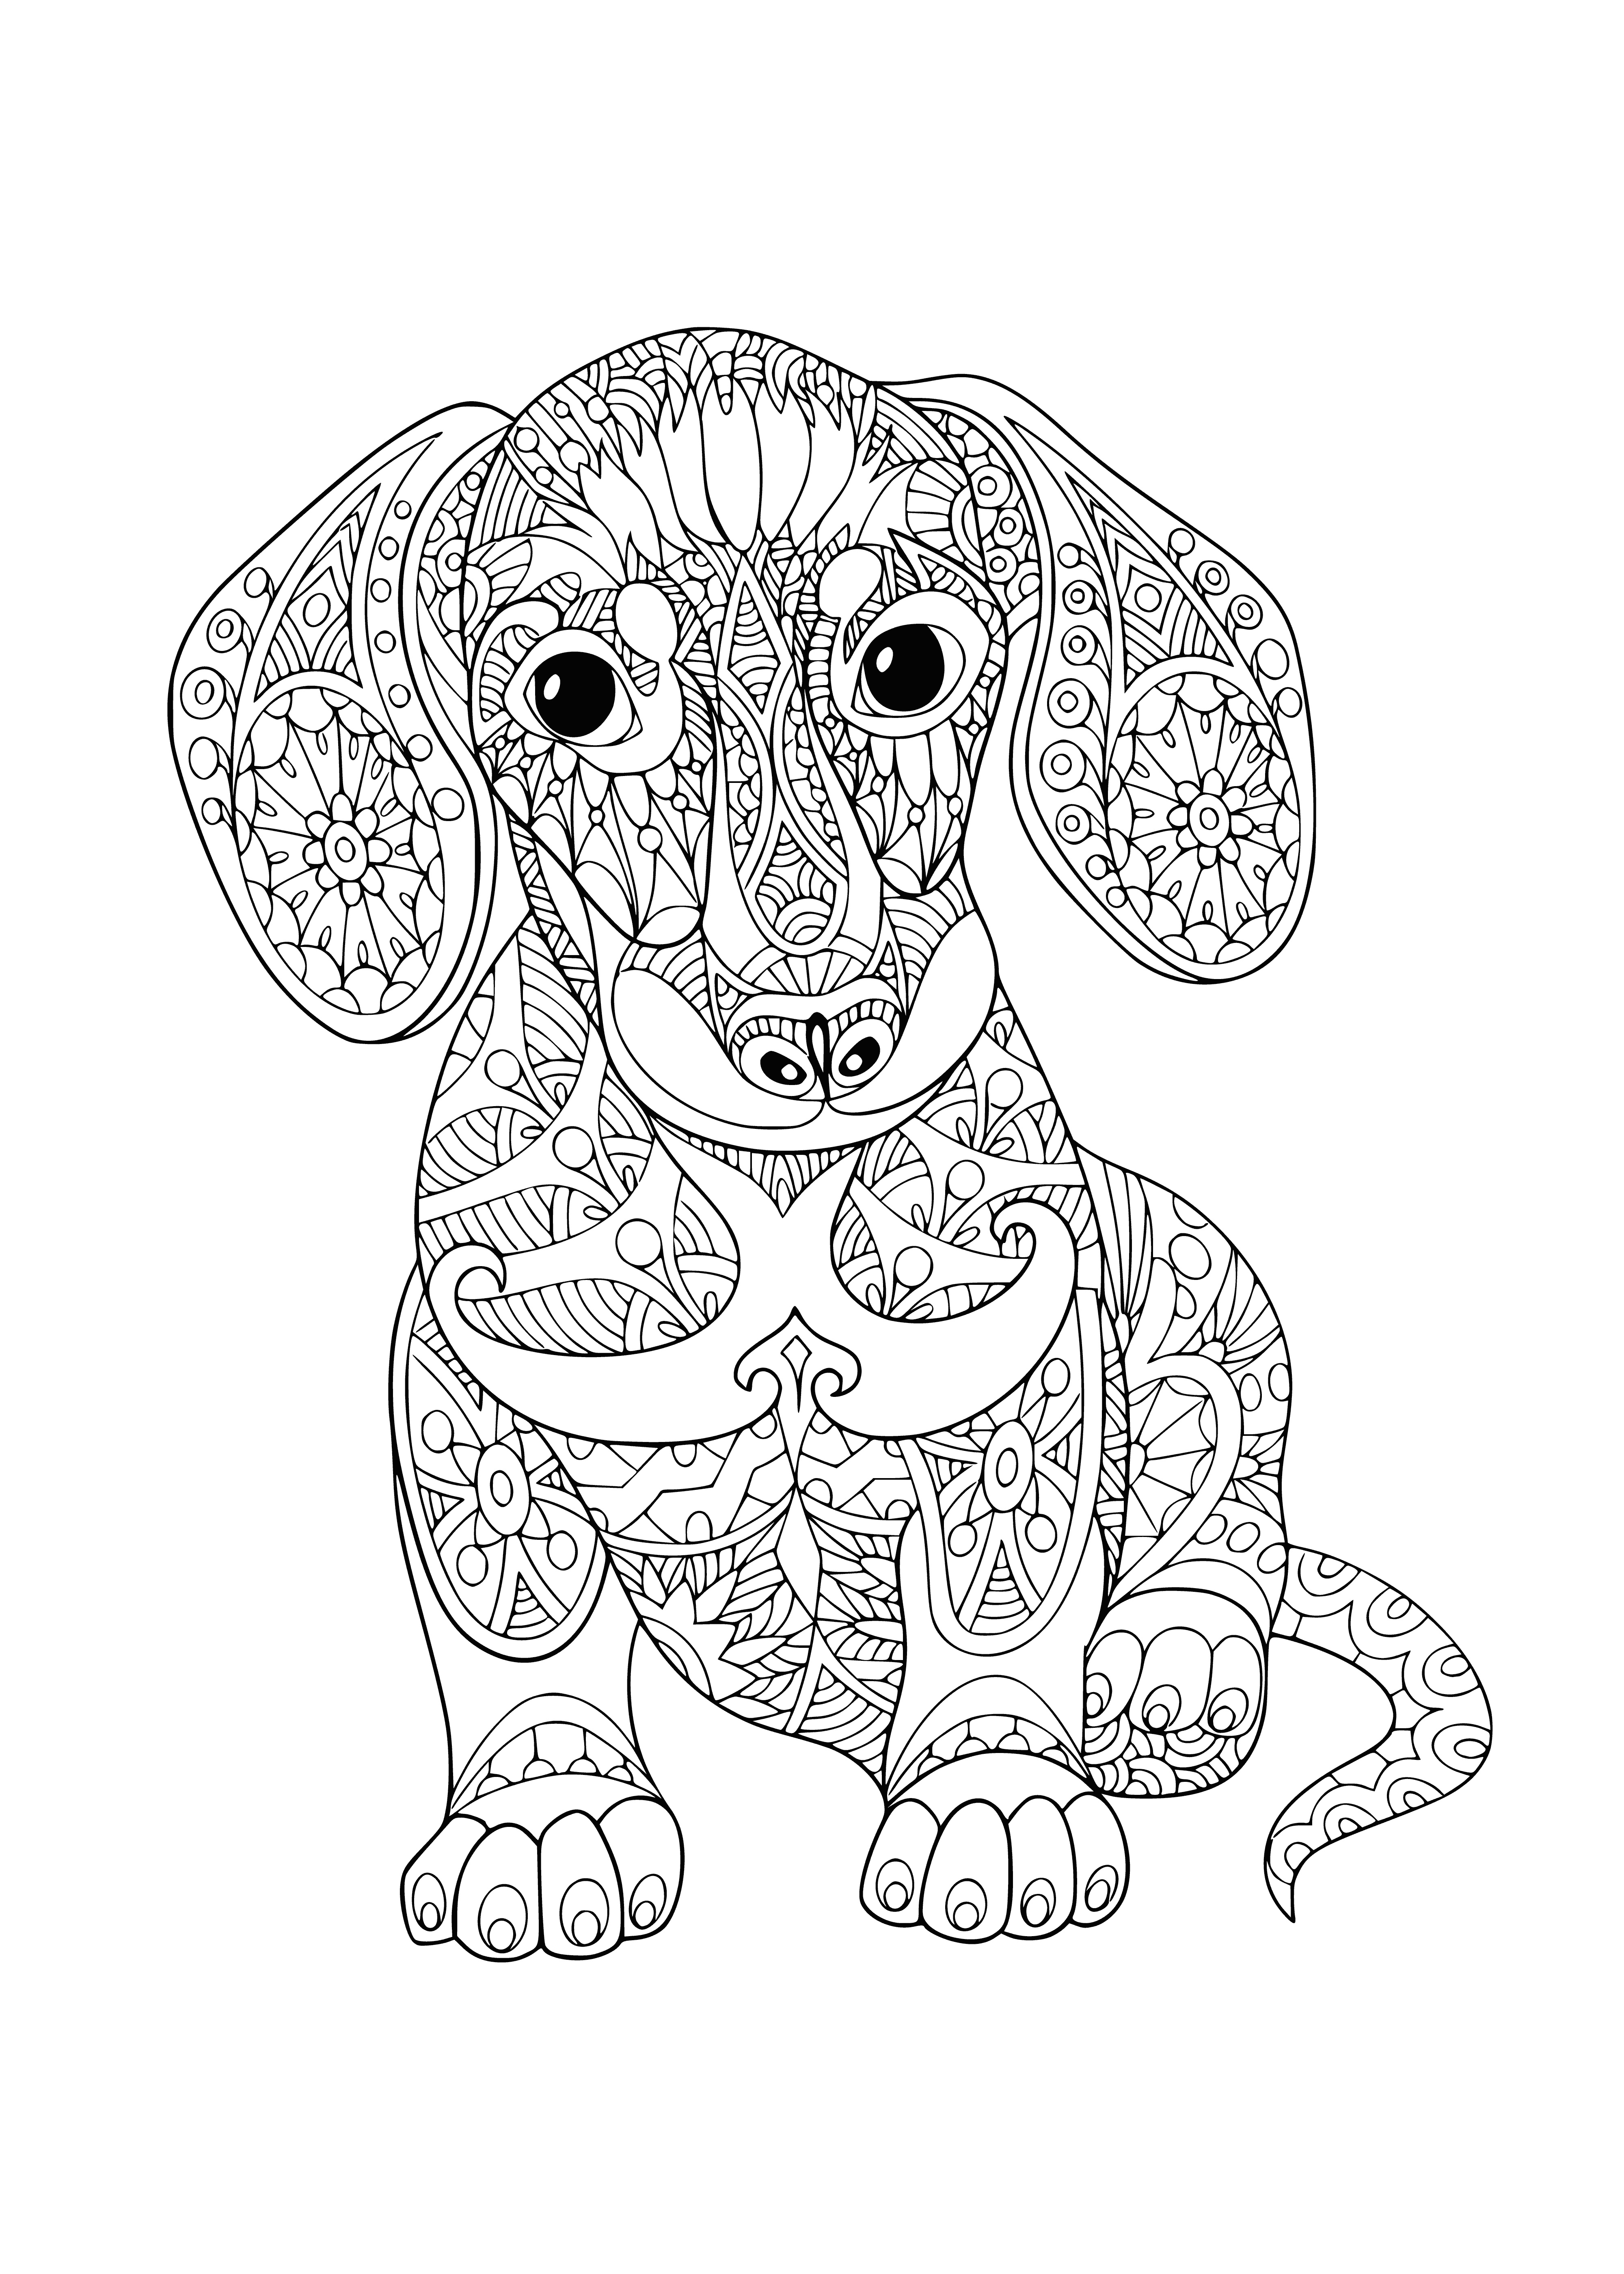 Fee coloring page